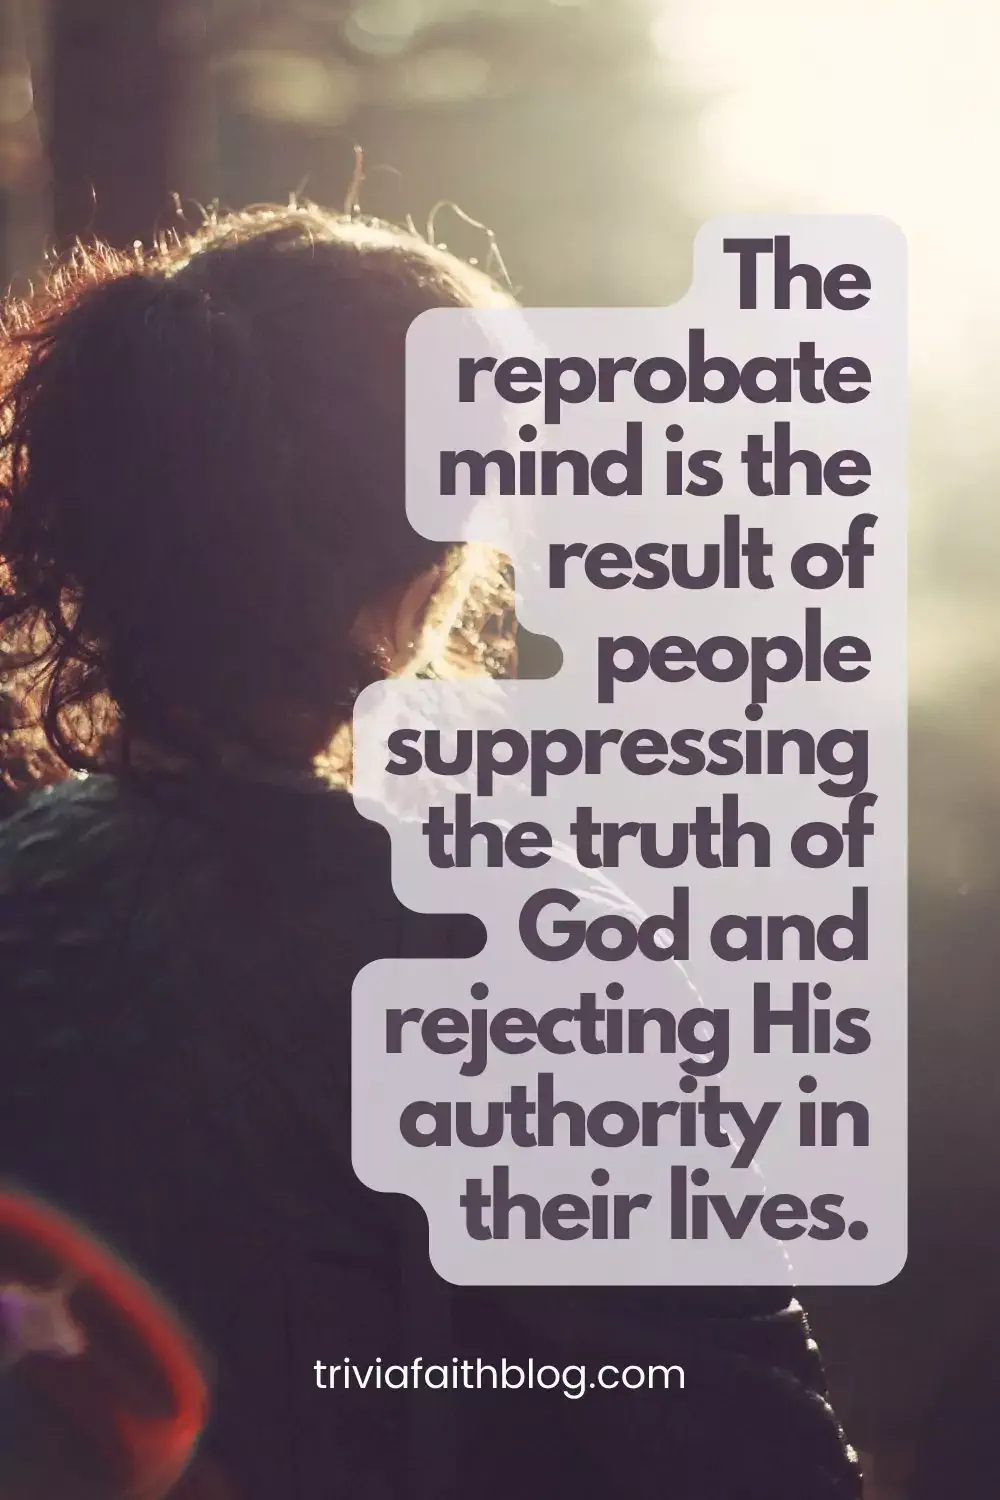 The reprobate mind is the result of people suppressing the truth of God and rejecting His authority in their lives.